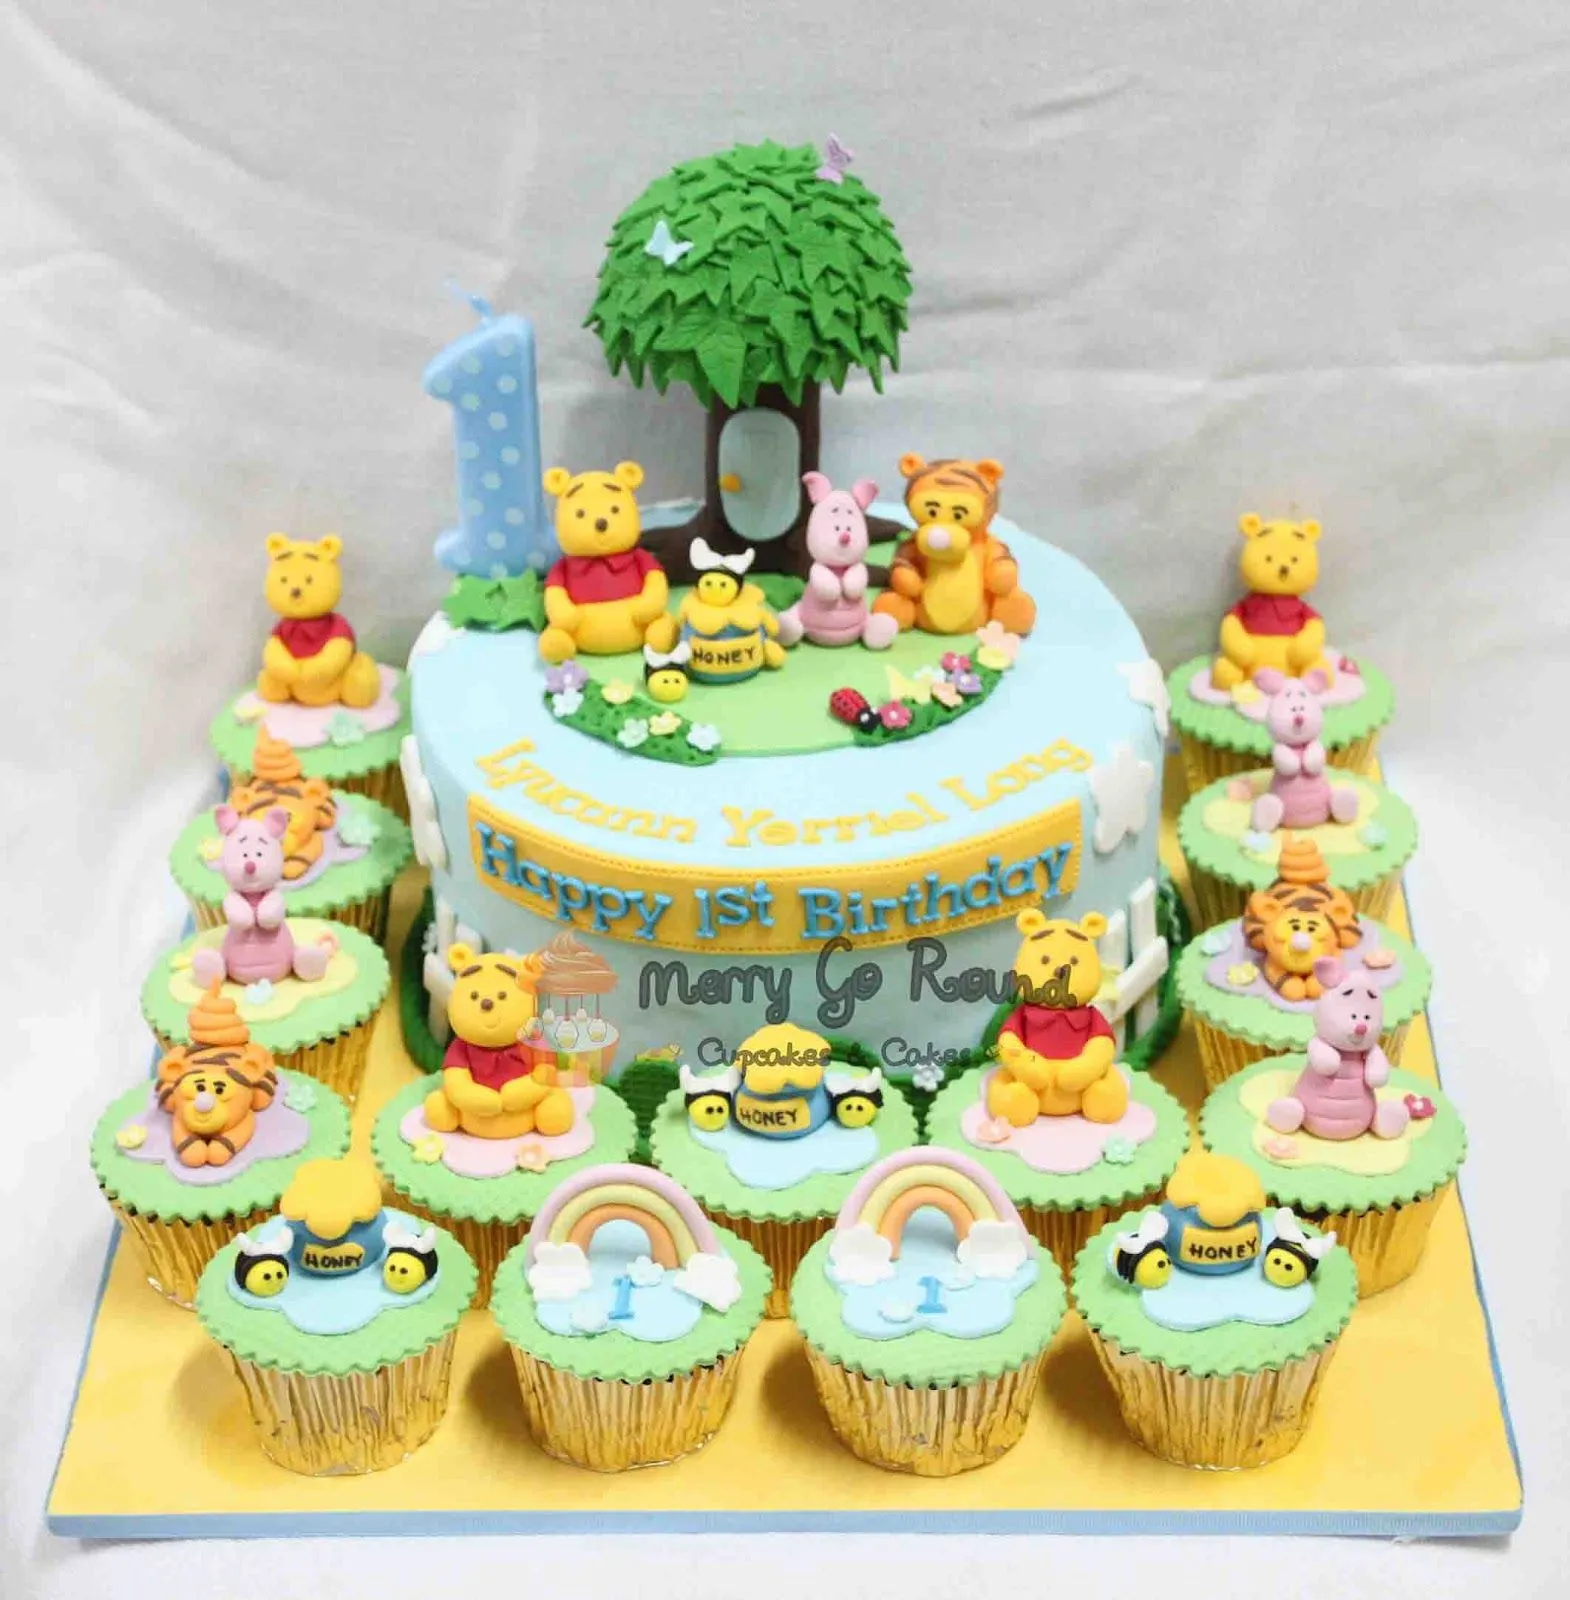 Merry Go Round - Cupcakes & Cakes: Winnie The Pooh Cakes and Cupcakes!